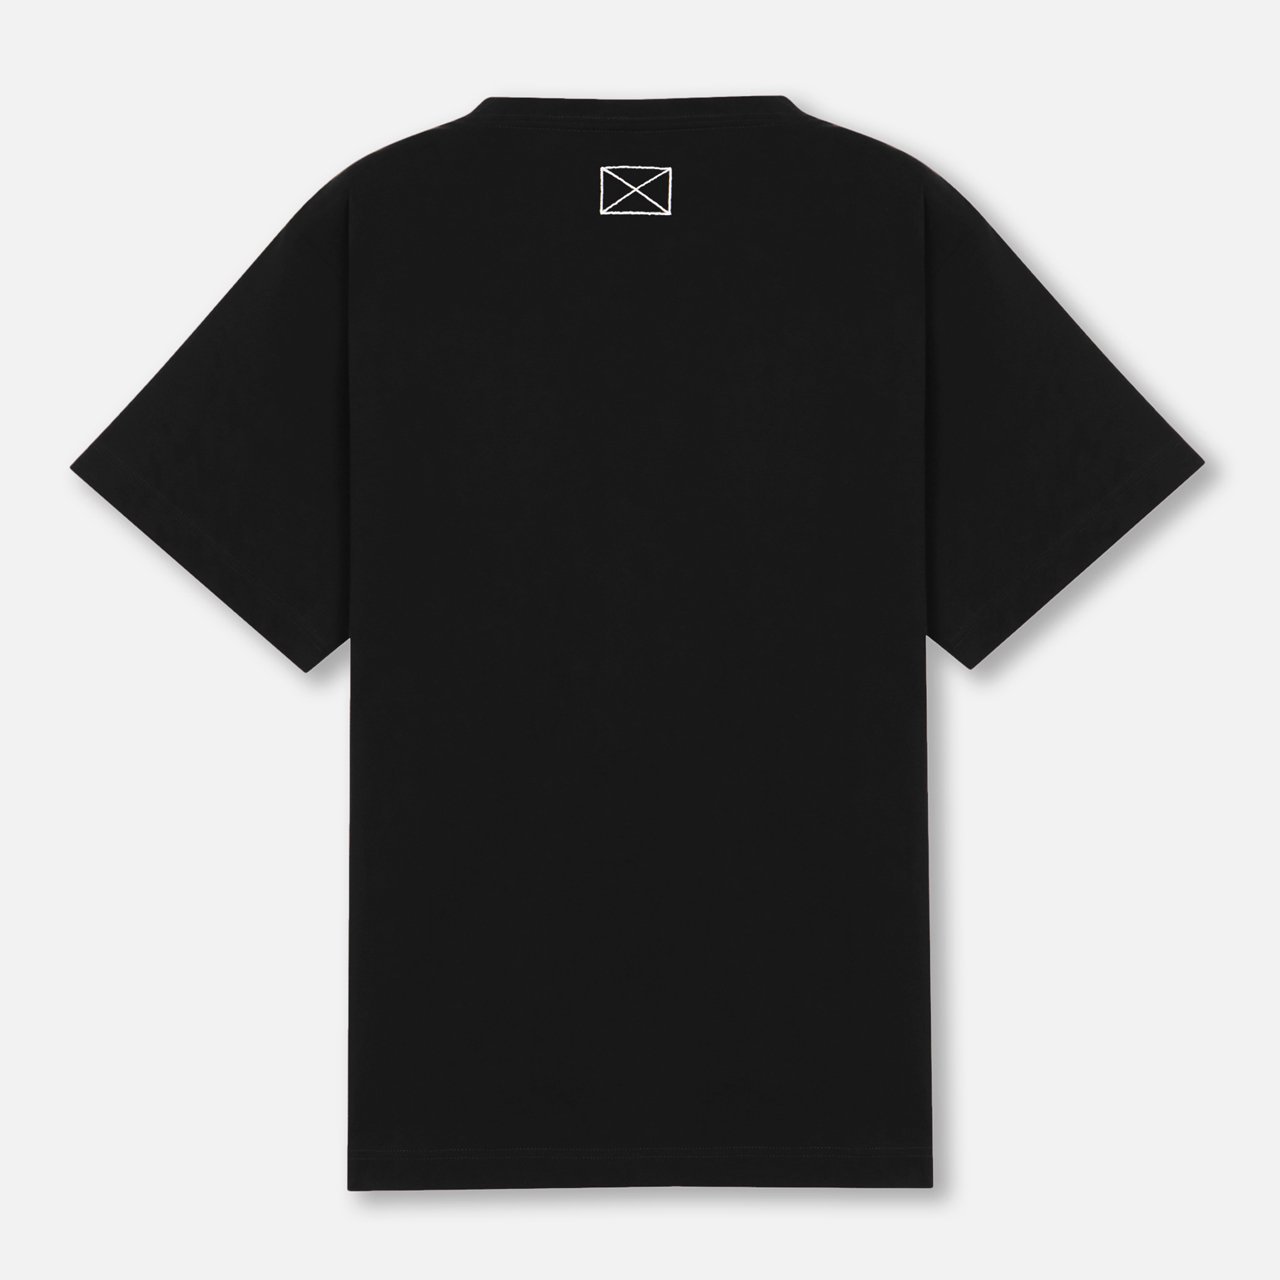 <img class='new_mark_img1' src='https://img.shop-pro.jp/img/new/icons5.gif' style='border:none;display:inline;margin:0px;padding:0px;width:auto;' />MLVINCE () | CLASSIC LOGO S/S TEE BLACK